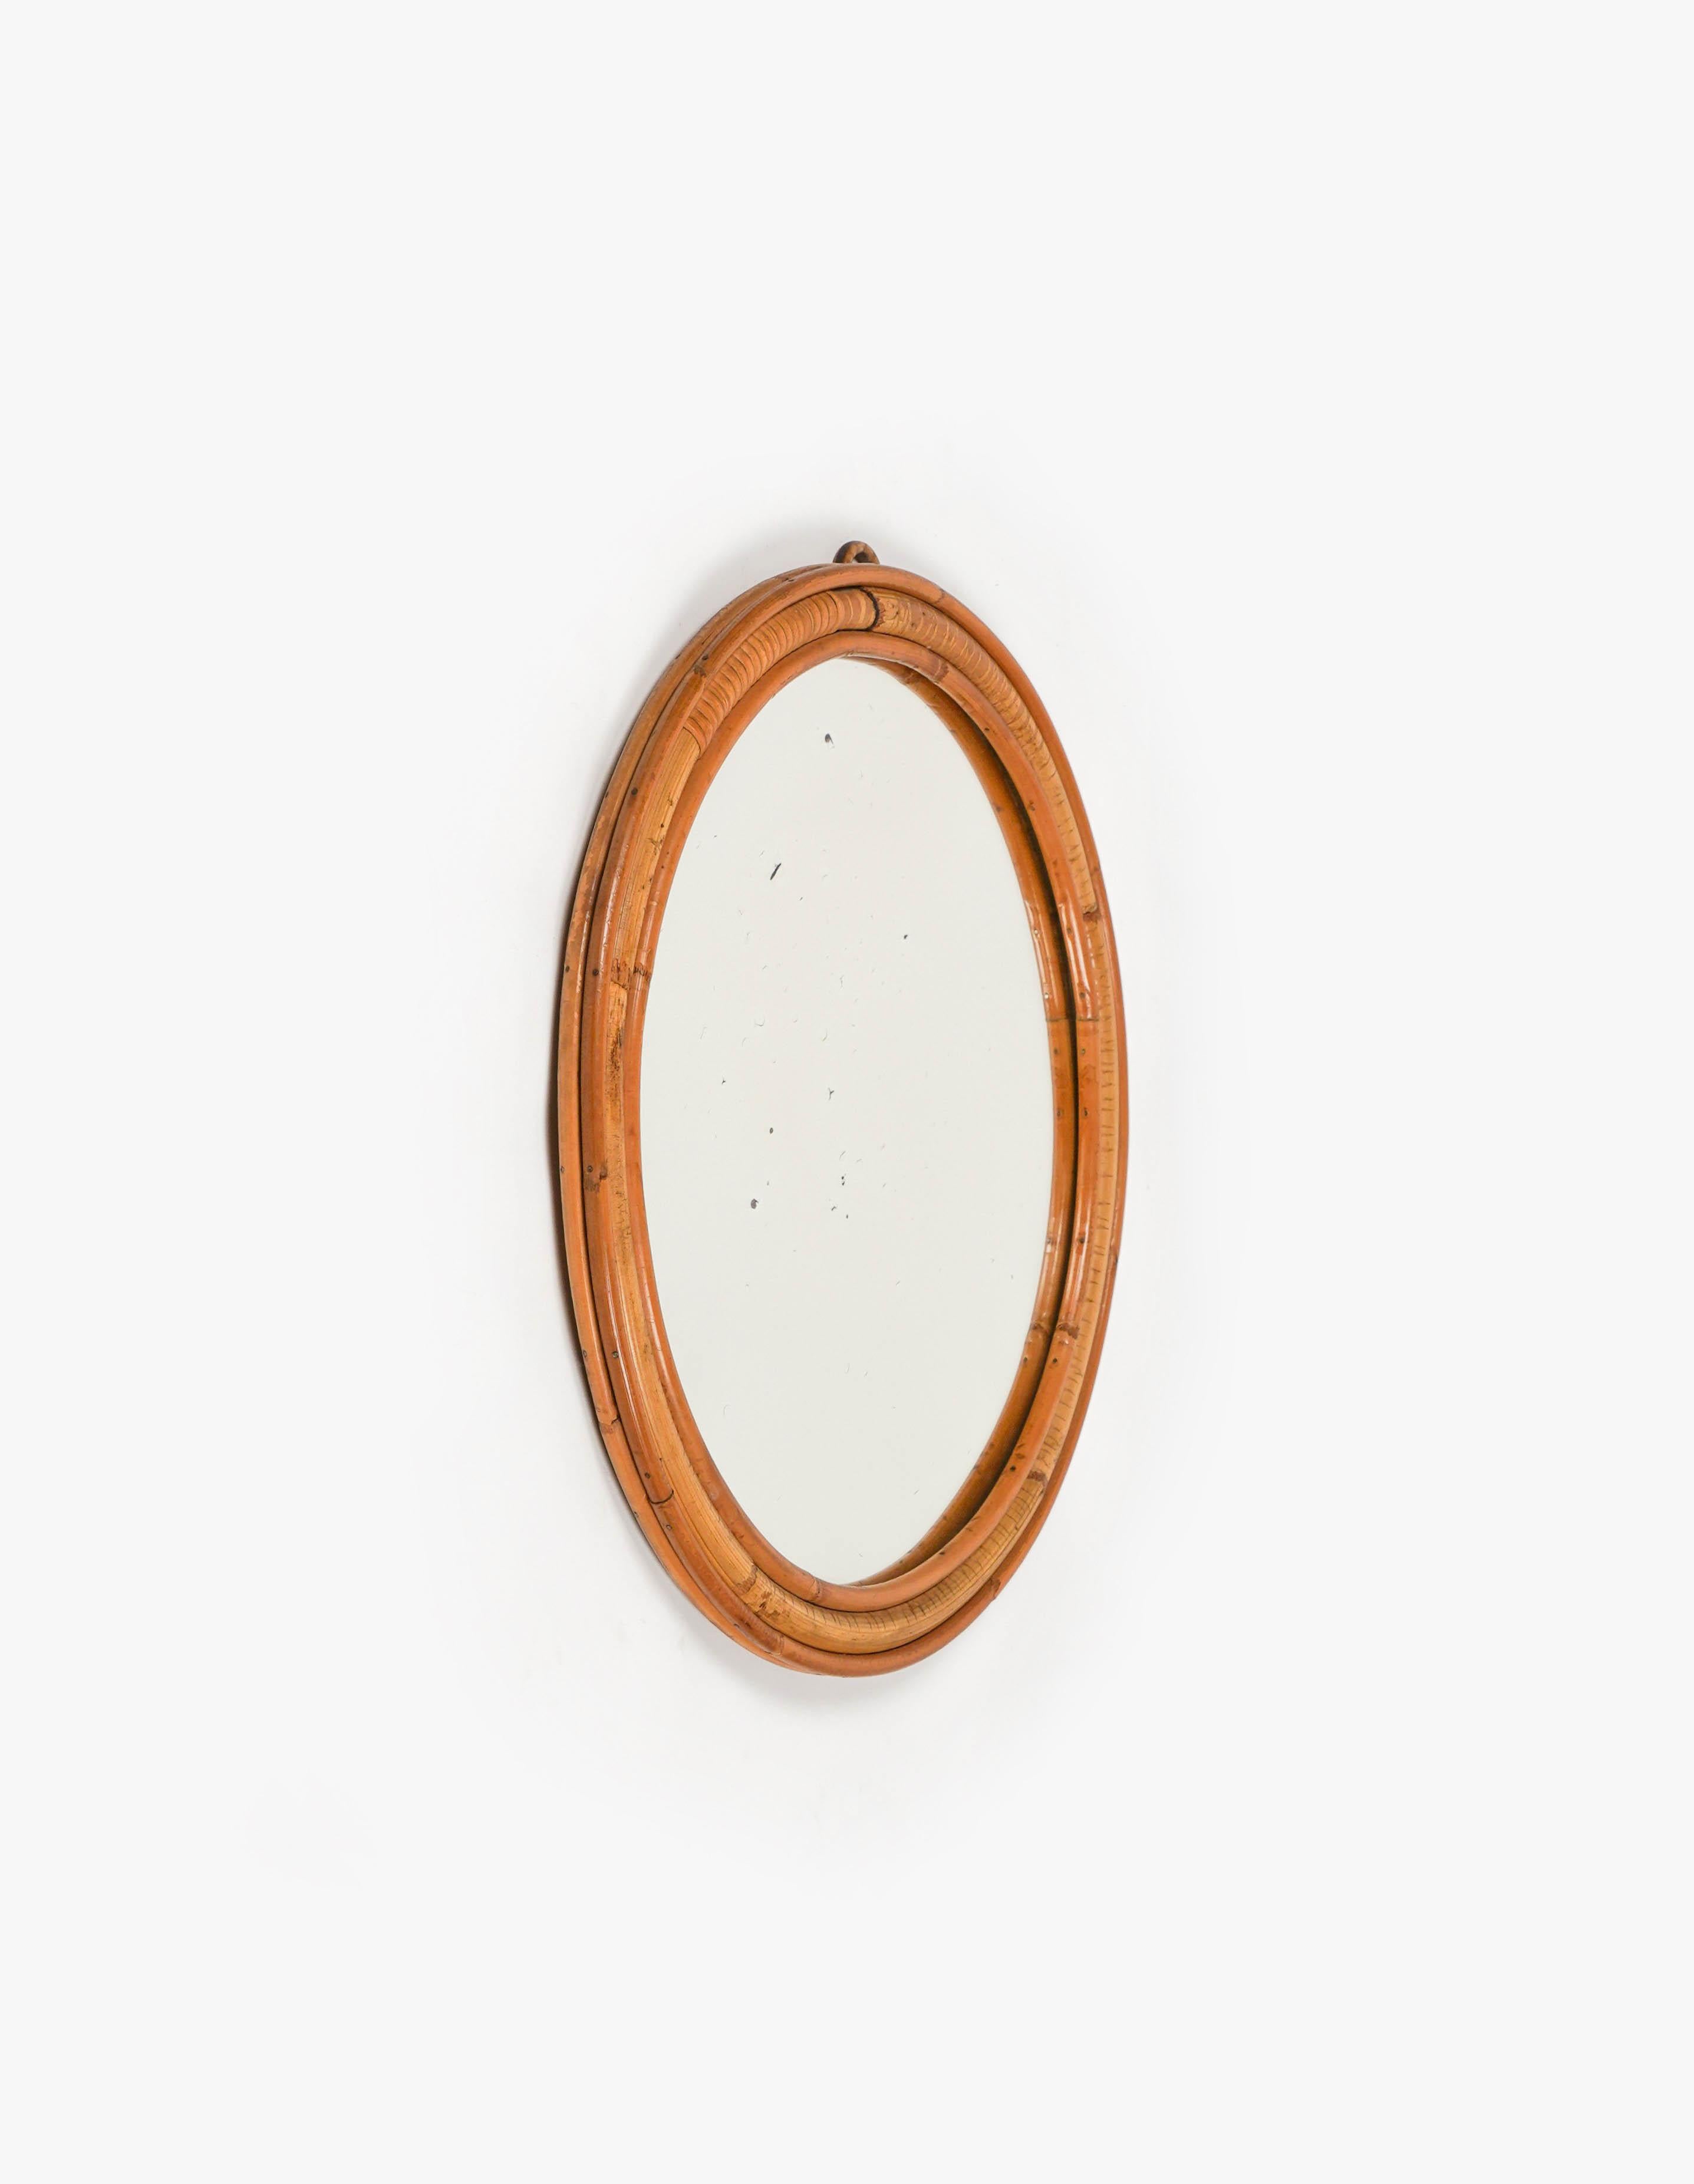 Midcentury Beautiful round wall mirror in bamboo and rattan.  

Made in Italy in the 1960s.  

The mirror, original of the period, shows signs of discolouration.